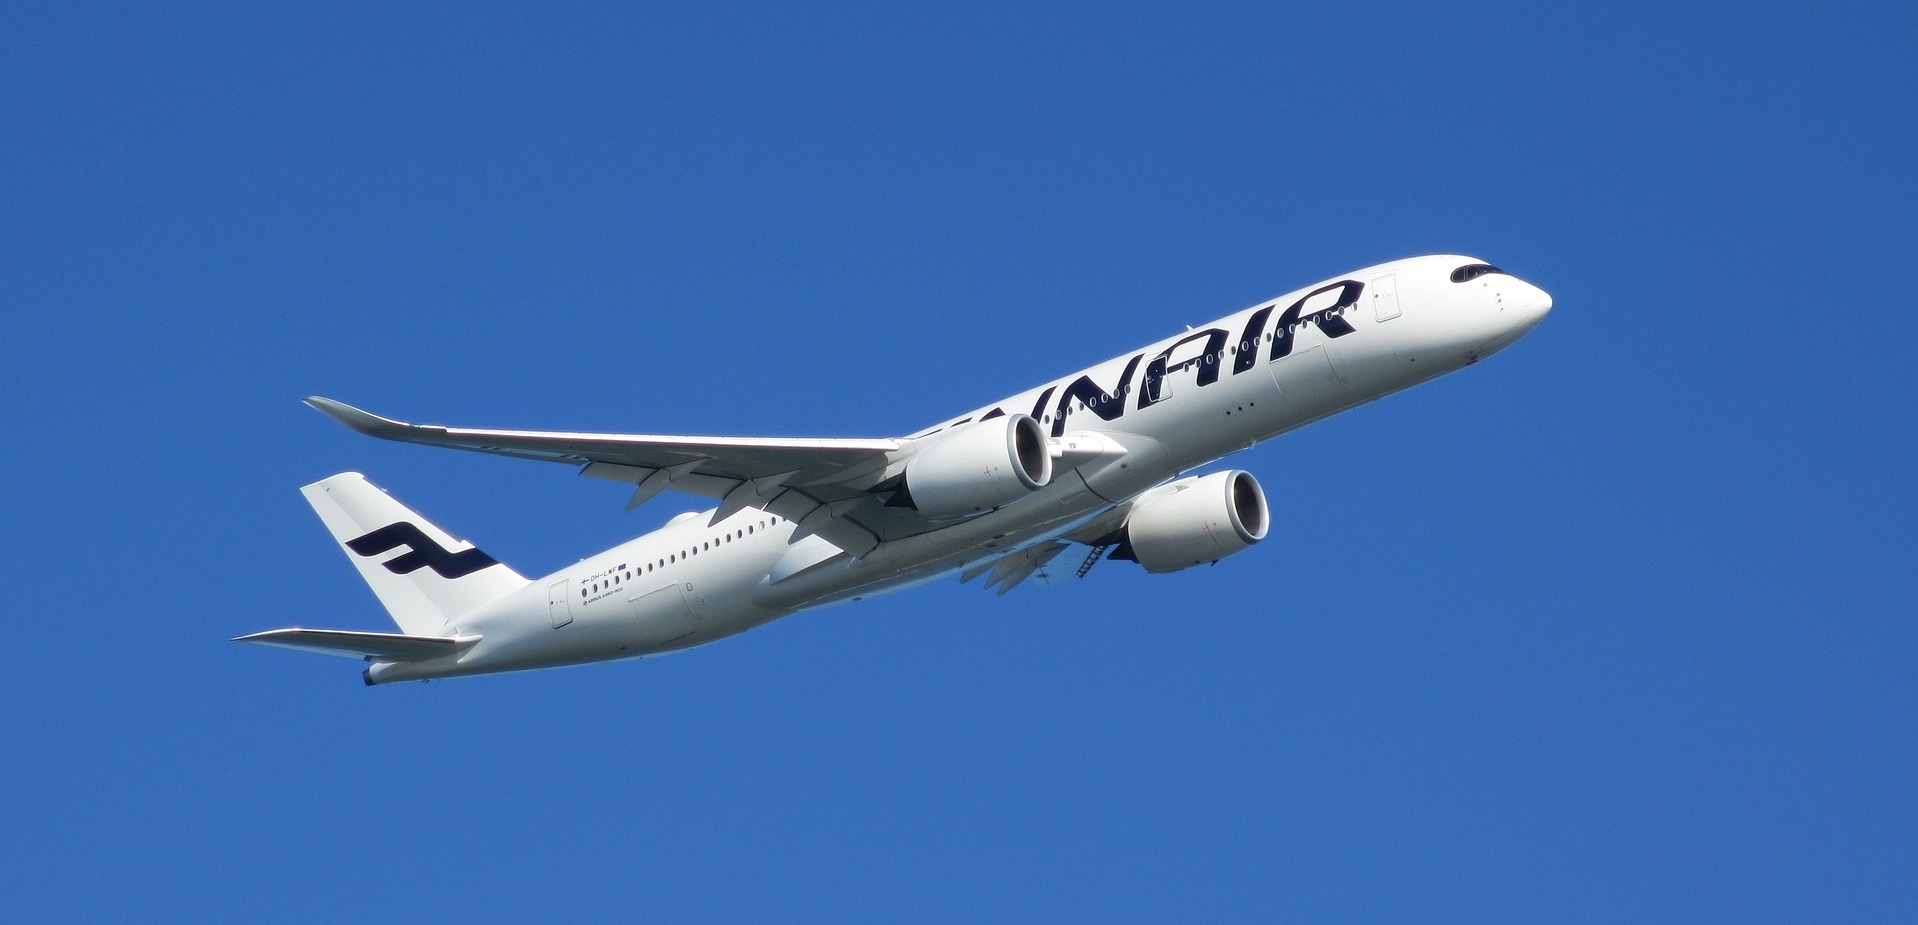 Introduction A Trip to China on Finnair Live and Let's Fly